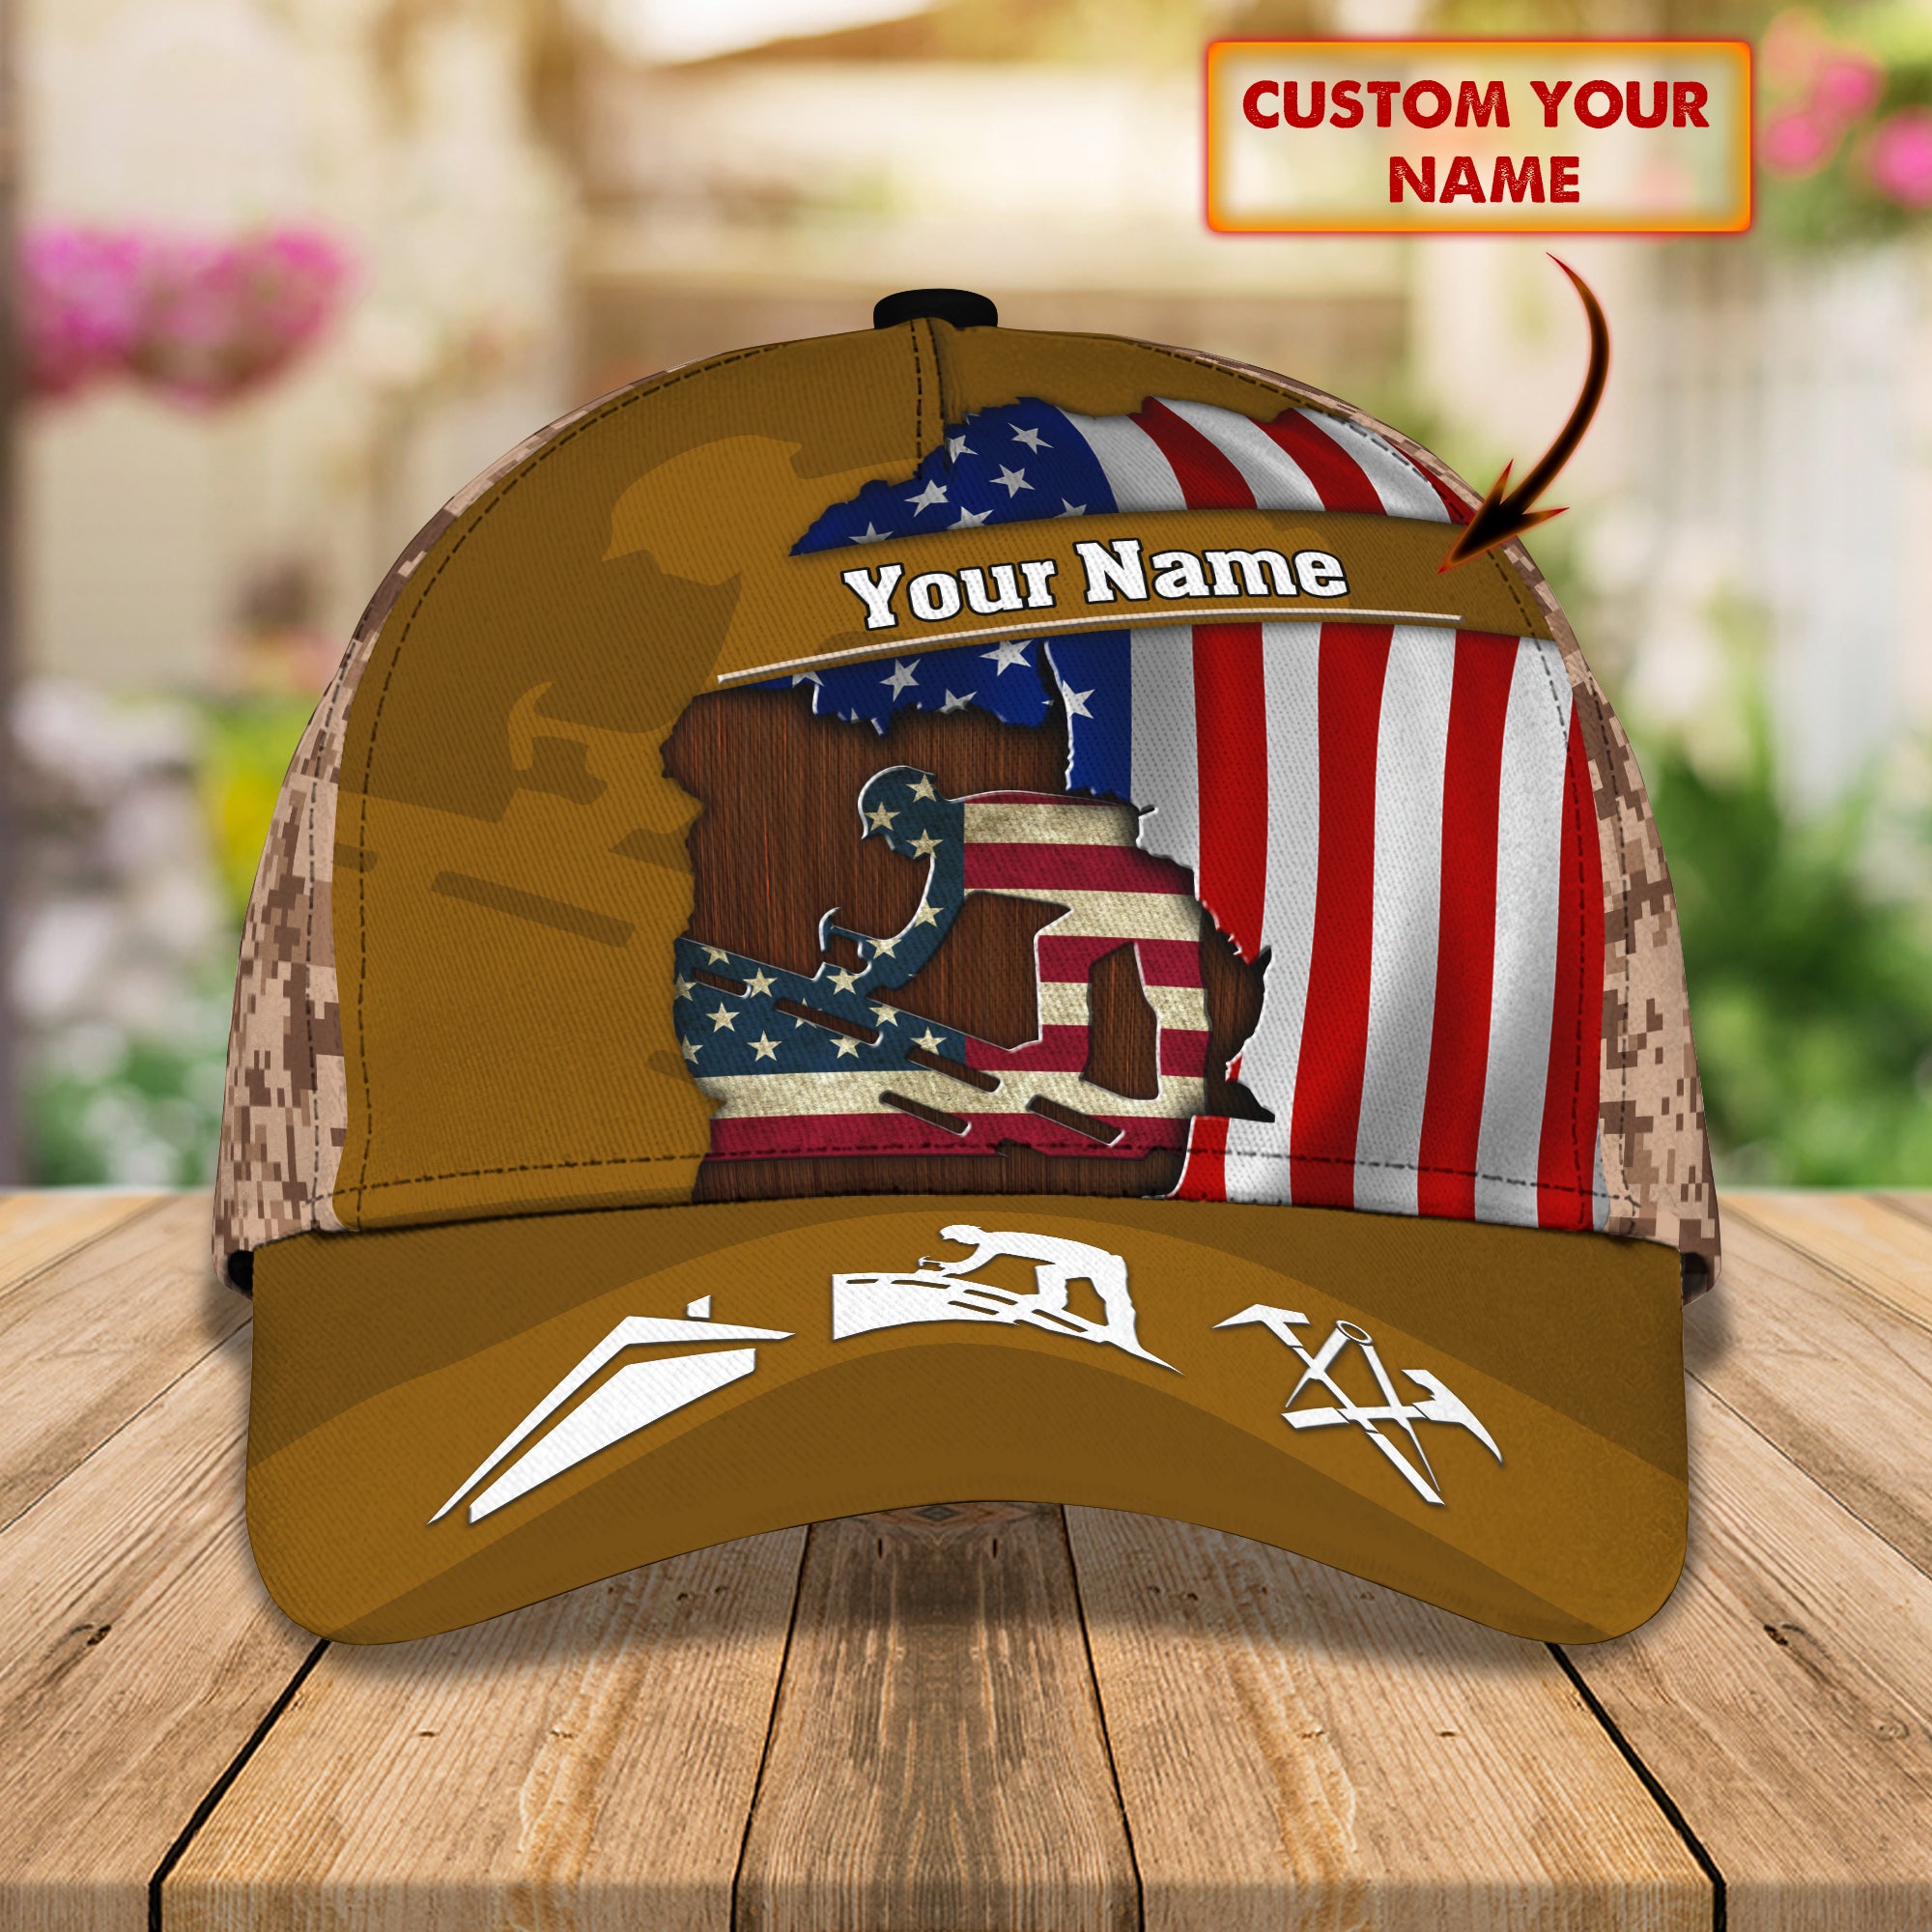 Roofer Hd98- Personalized Name Cap -Loop- Hd98 36